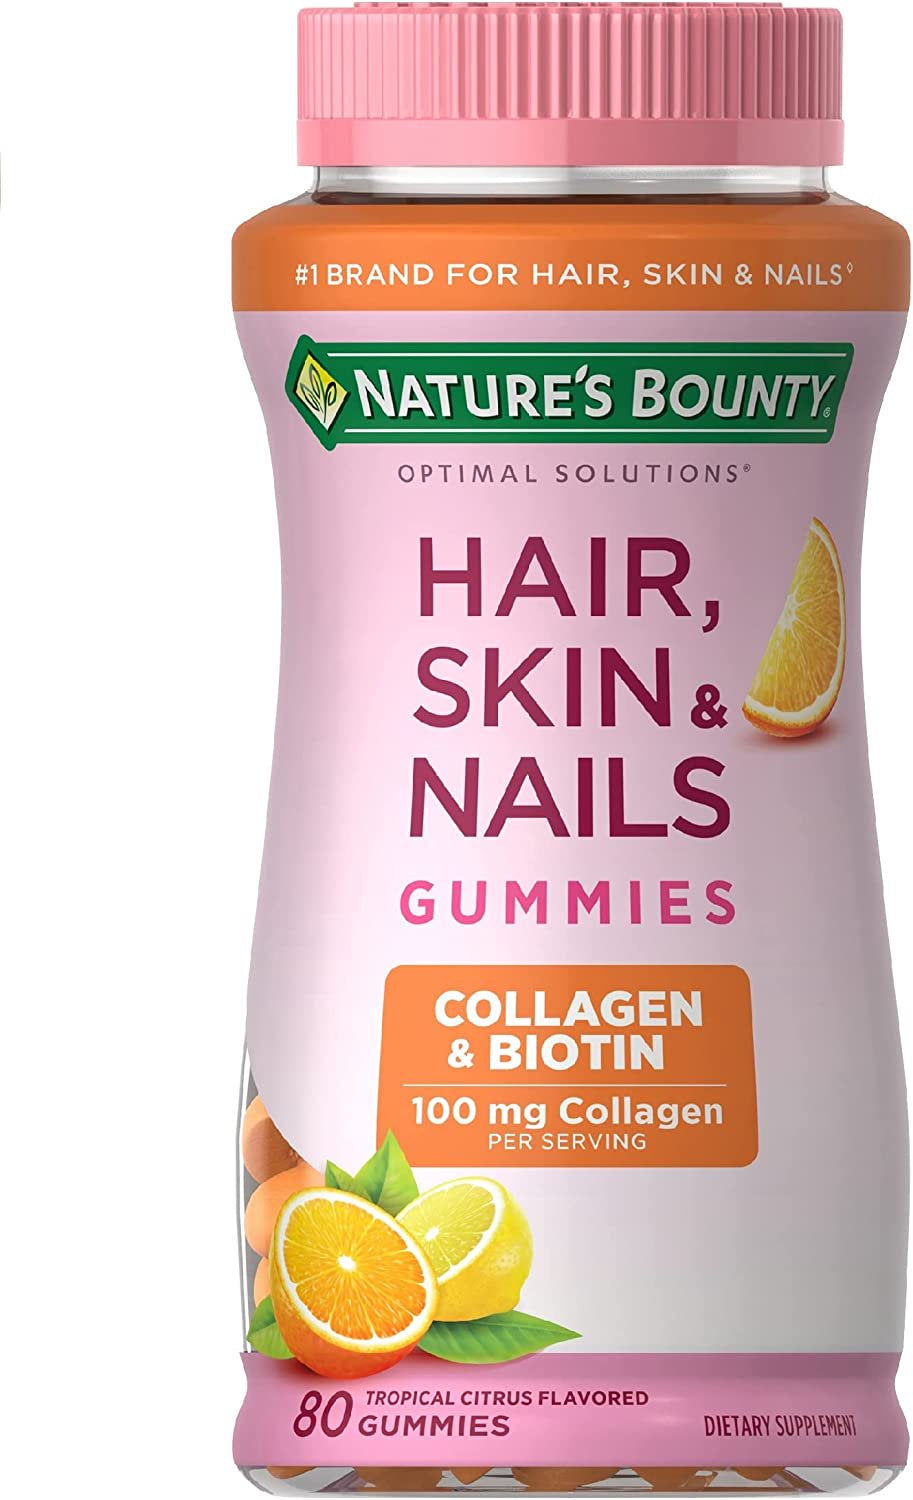 Nature'S Bounty Hair, Skin & Nails with Biotin and Collagen, Citrus-Flavored Gummies Vitamin Supplement, Supports Hair, Skin, and Nail Health for Women, 2500 Mcg, 80 Count